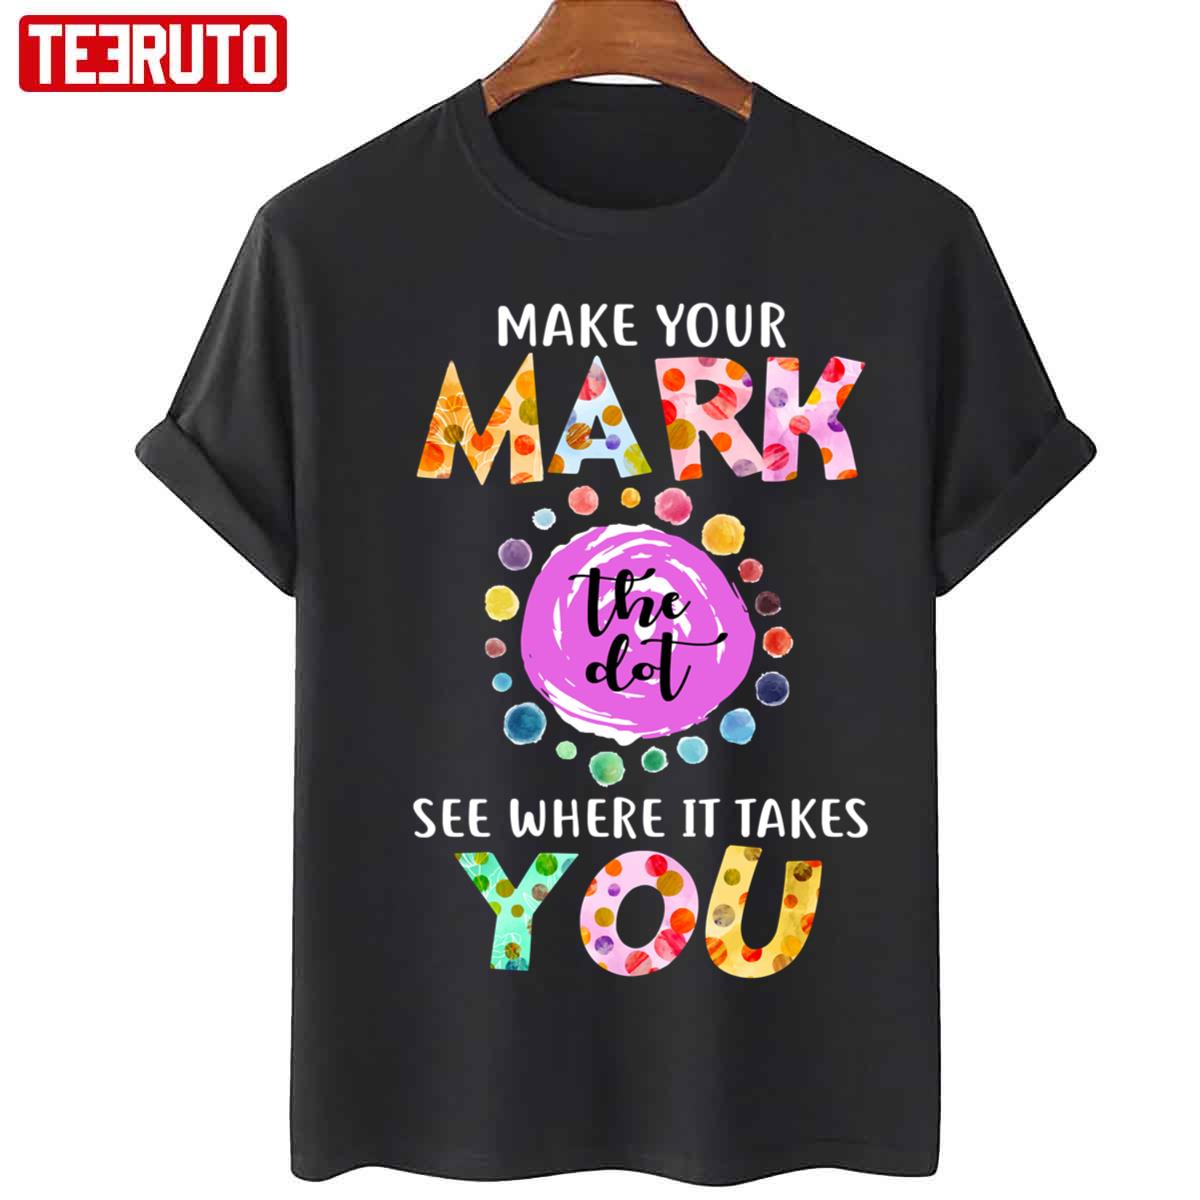 Dot Day September 15 Make Your Mark See Where It Takes You The Dot Unisex Sweatshirt